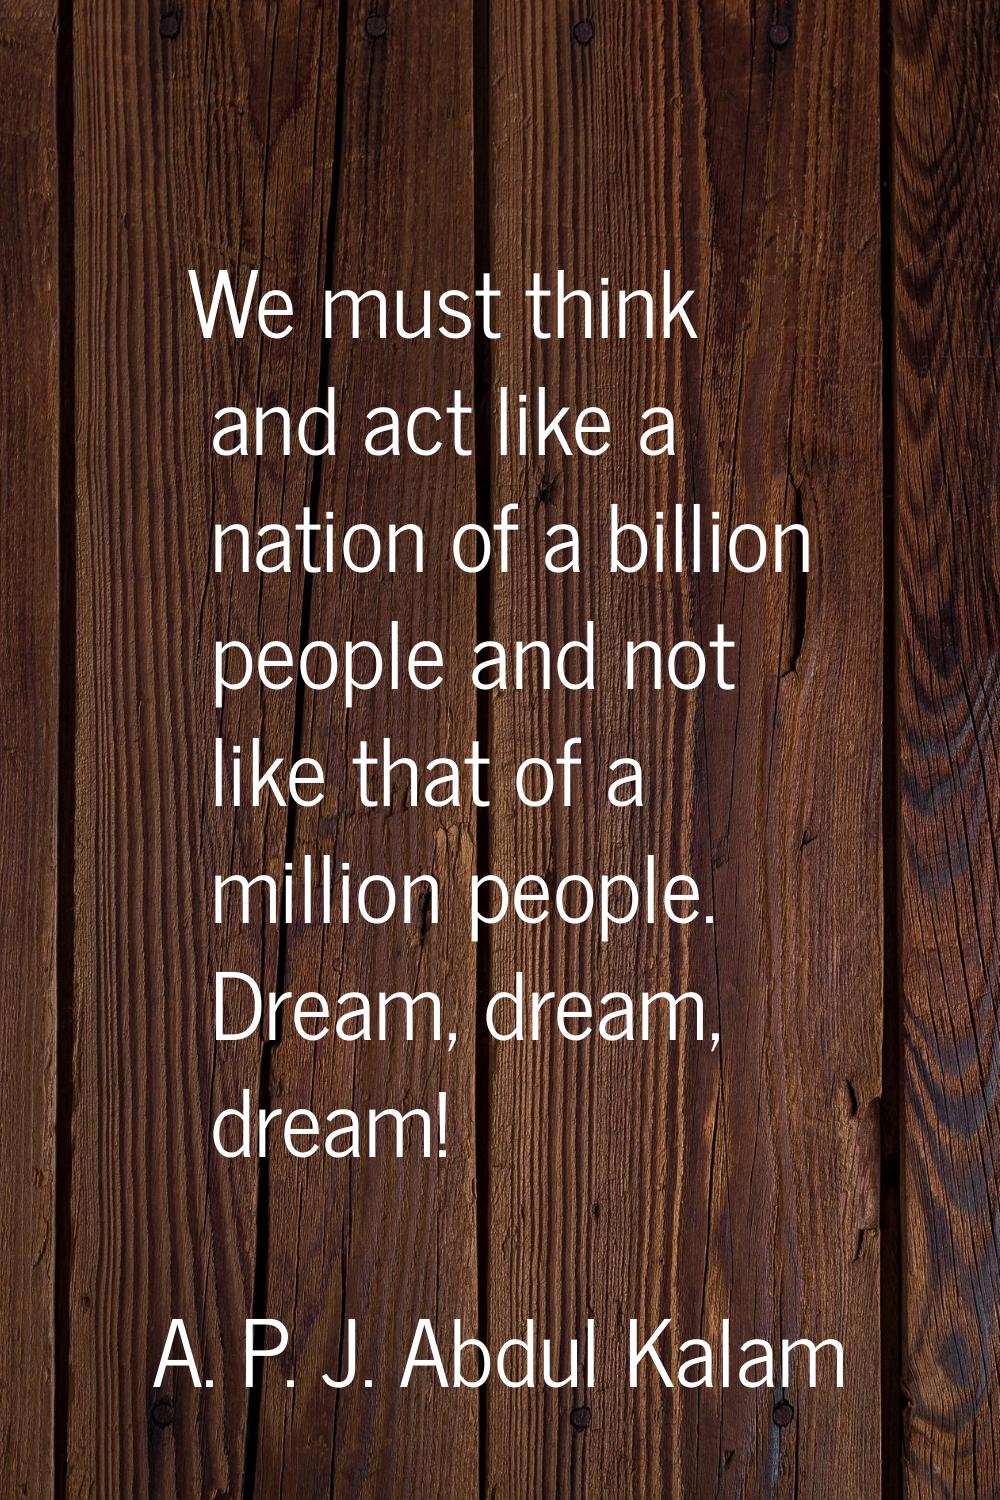 We must think and act like a nation of a billion people and not like that of a million people. Drea